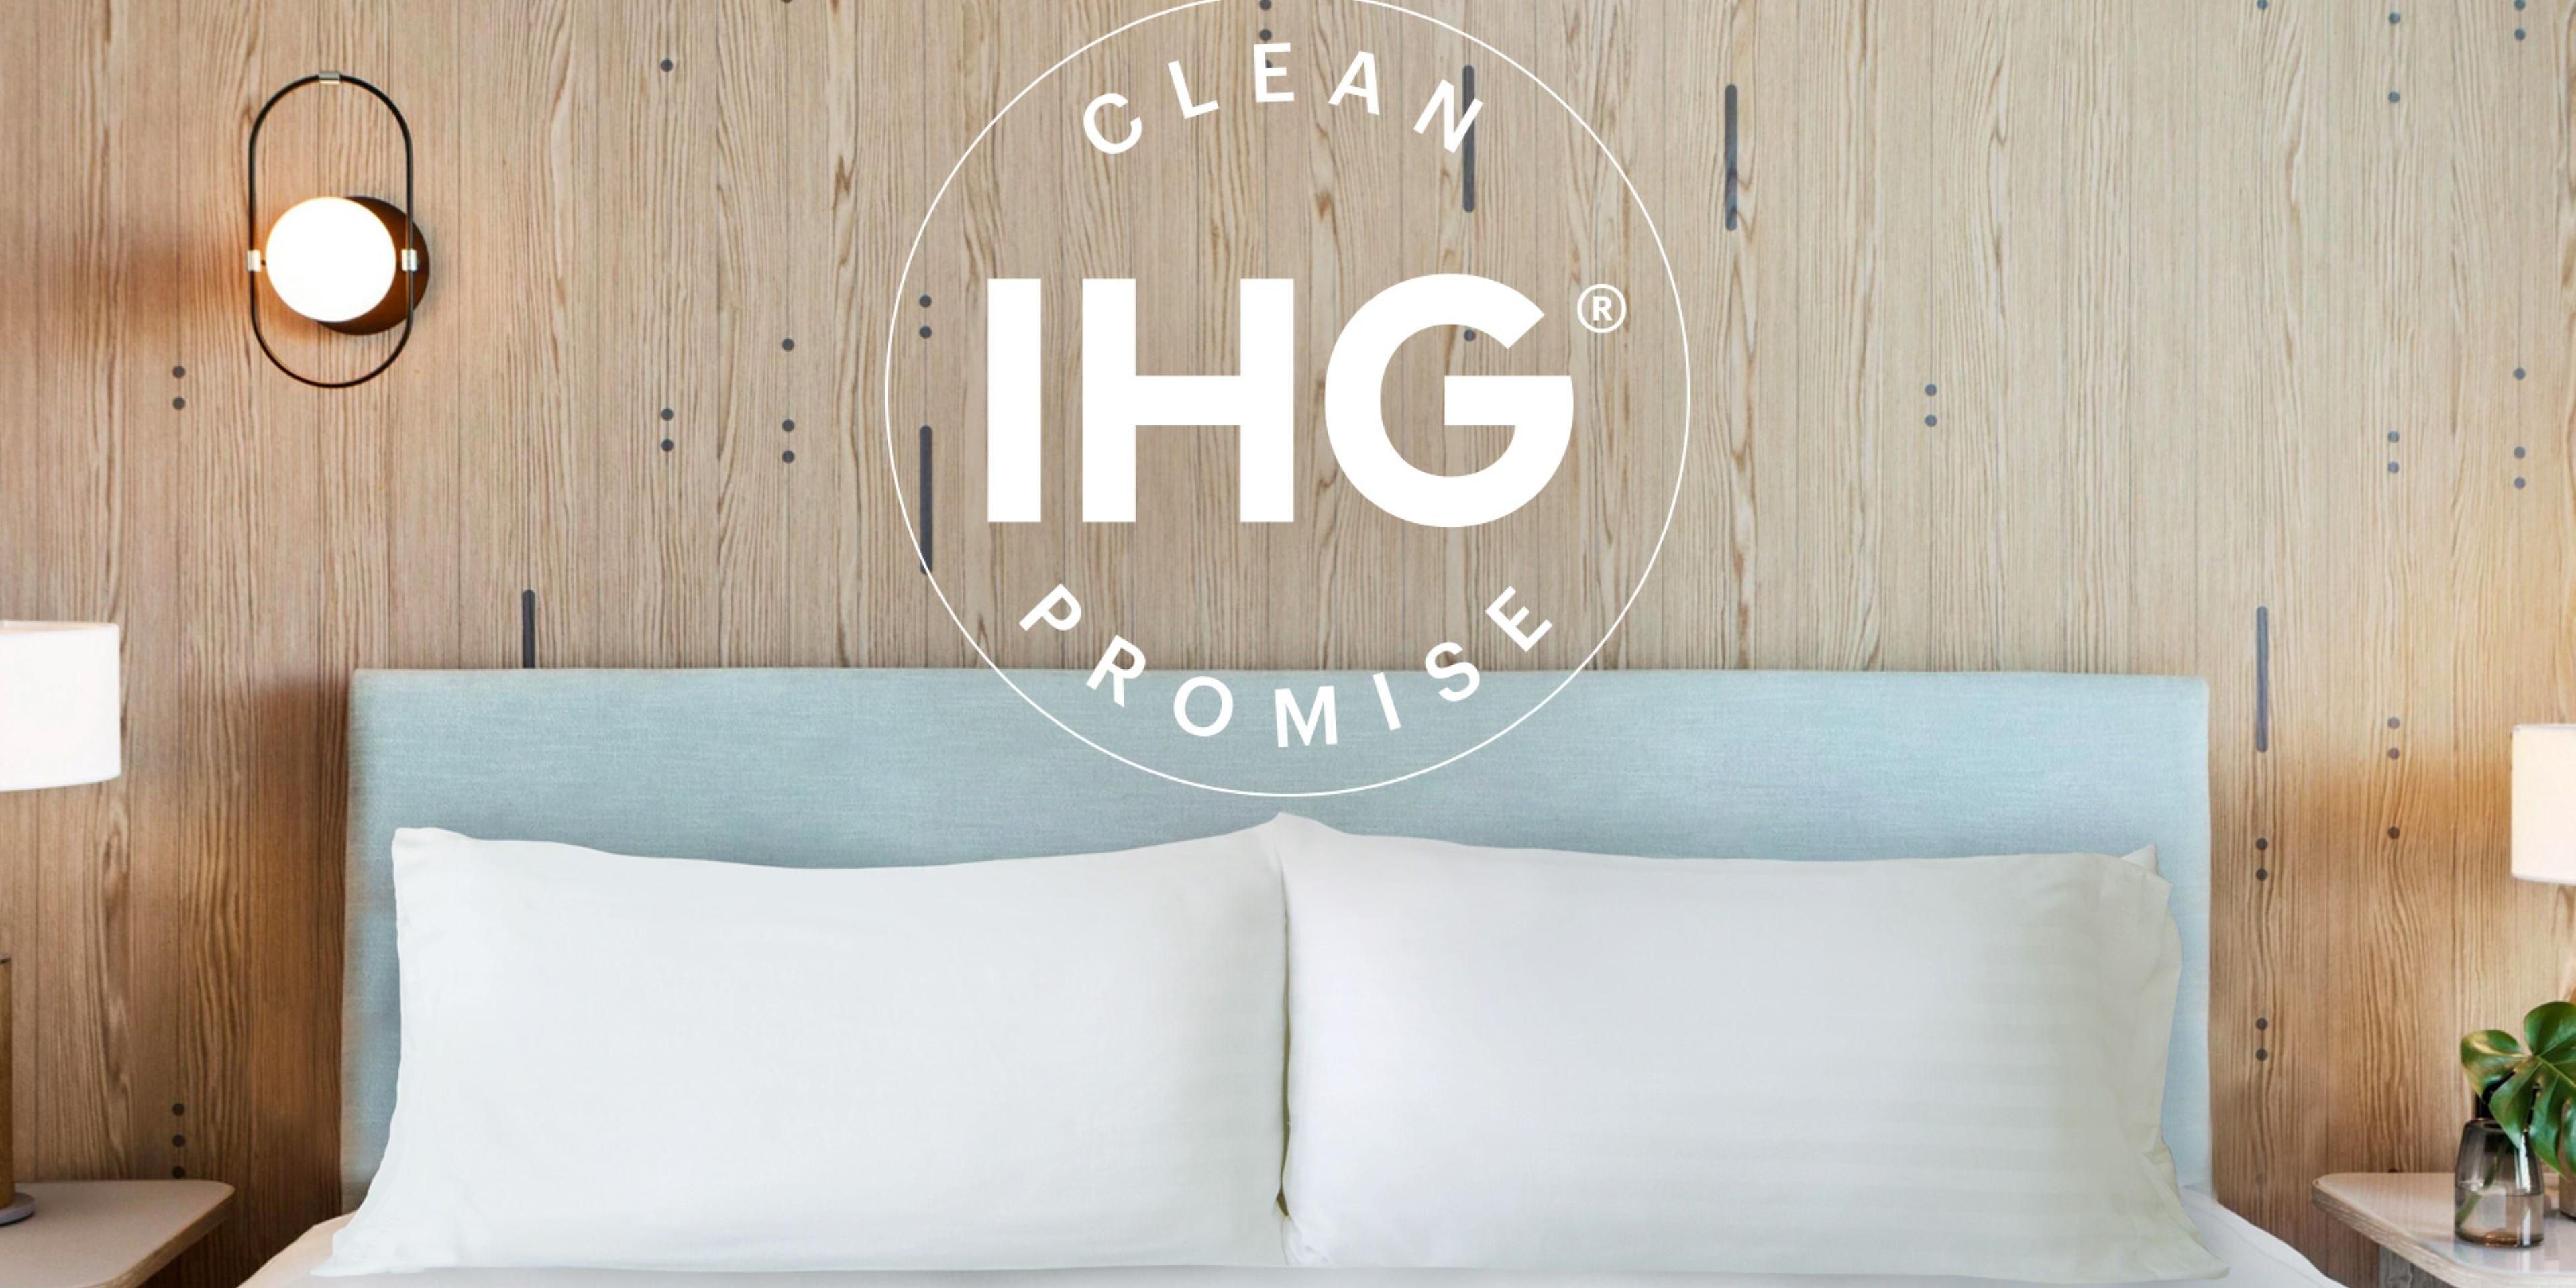 IHG enhances guest experience with new cleanliness safety procedures. The IHG Way of Clean program is now being expanded with additional COVID-19 protocols and best practices.